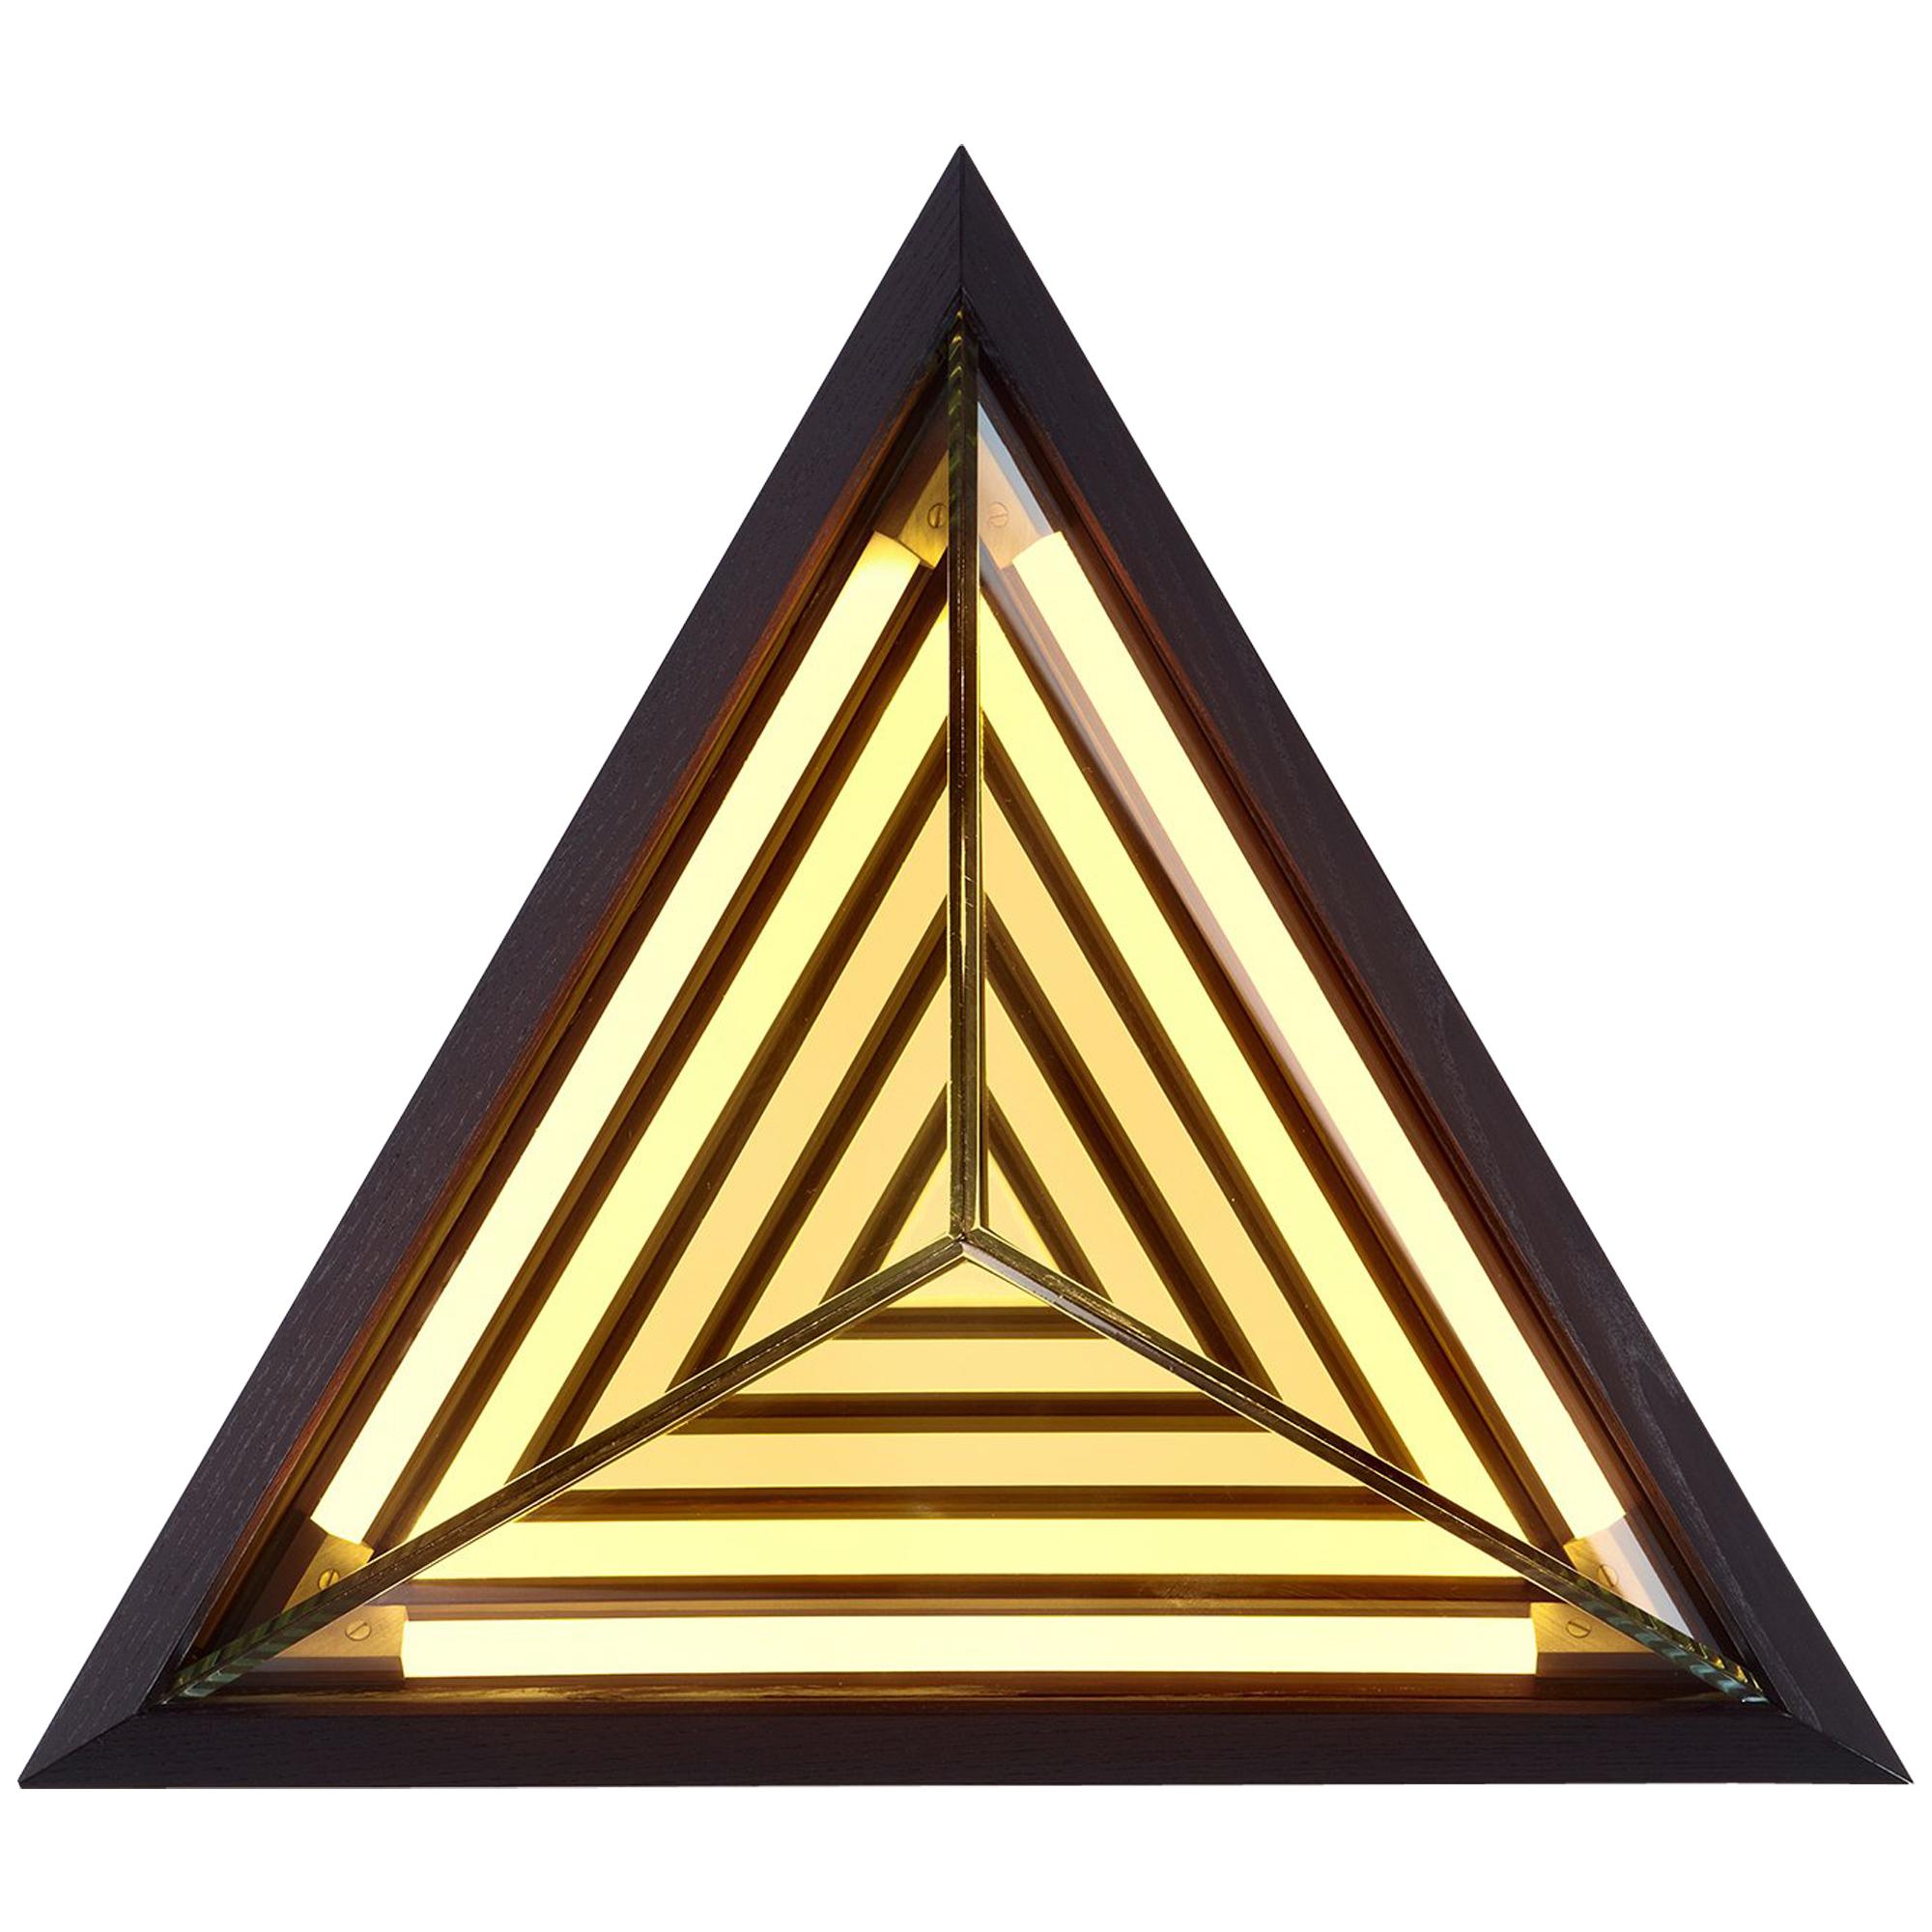 Stella Triangle Sconce in Black by Rosie Li for Roll & Hill